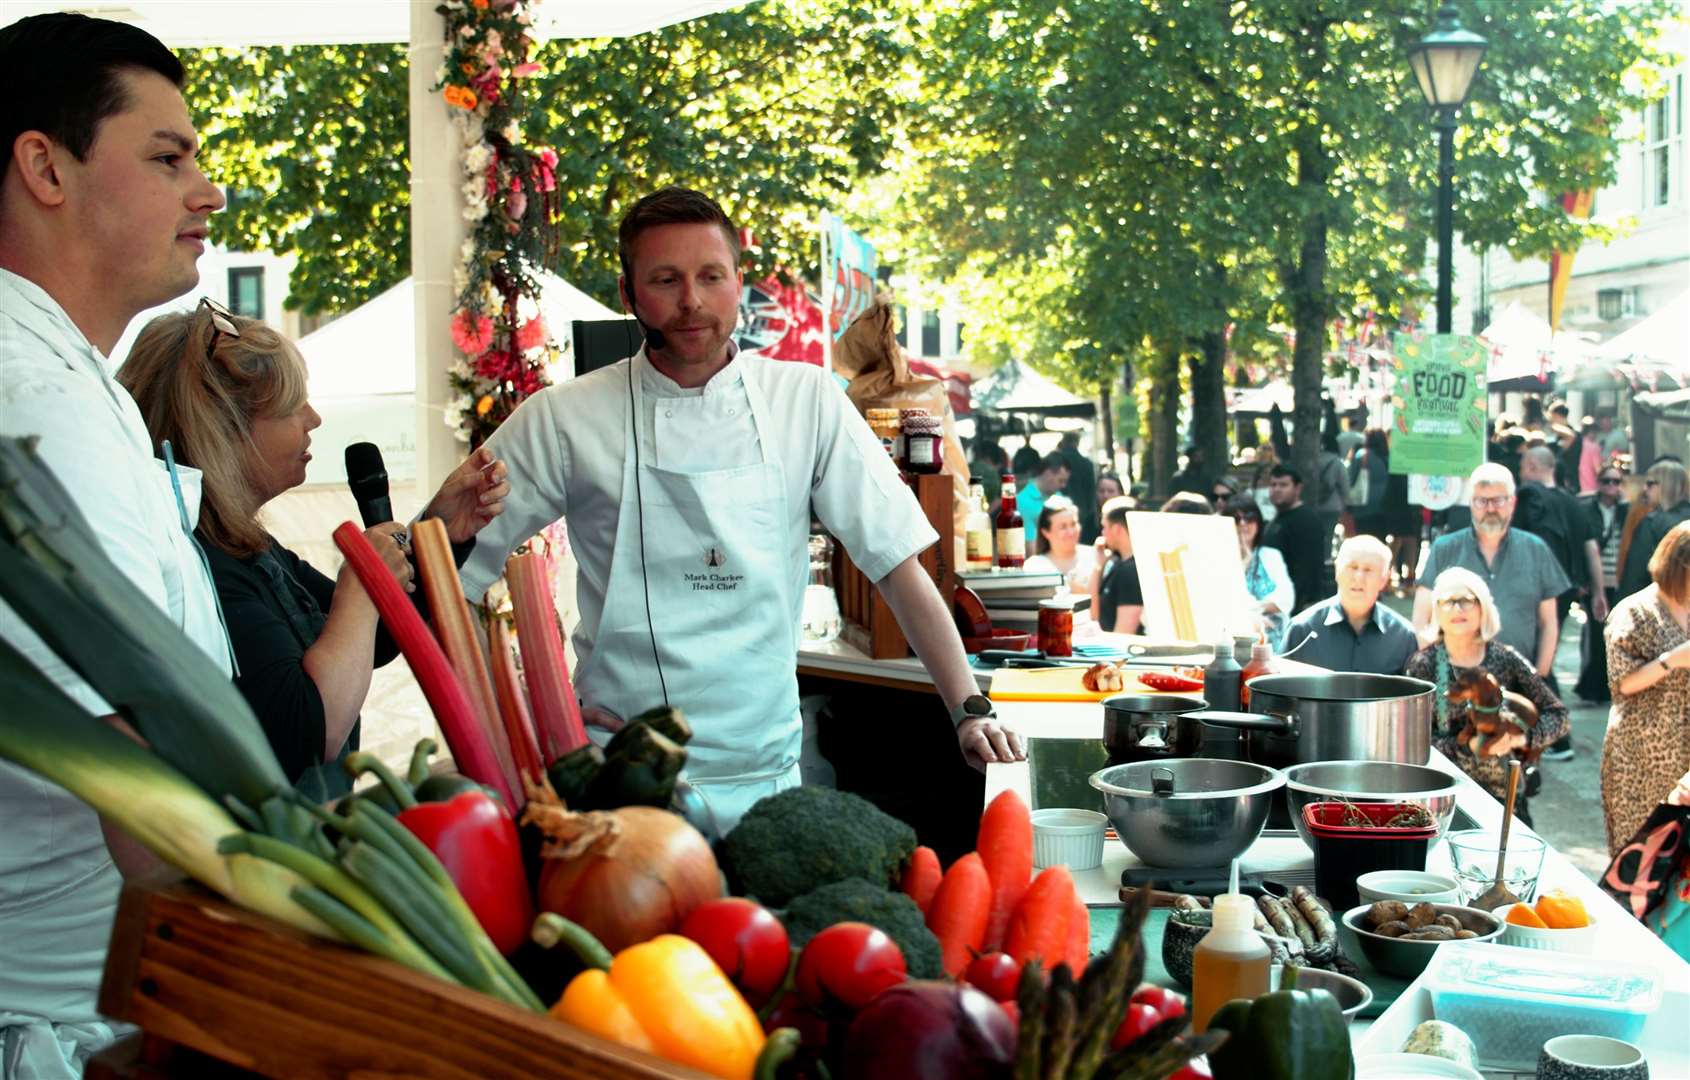 Sankey's Harvest Food Festival is taking place at The Pantiles in Tunbridge Wells this weekend